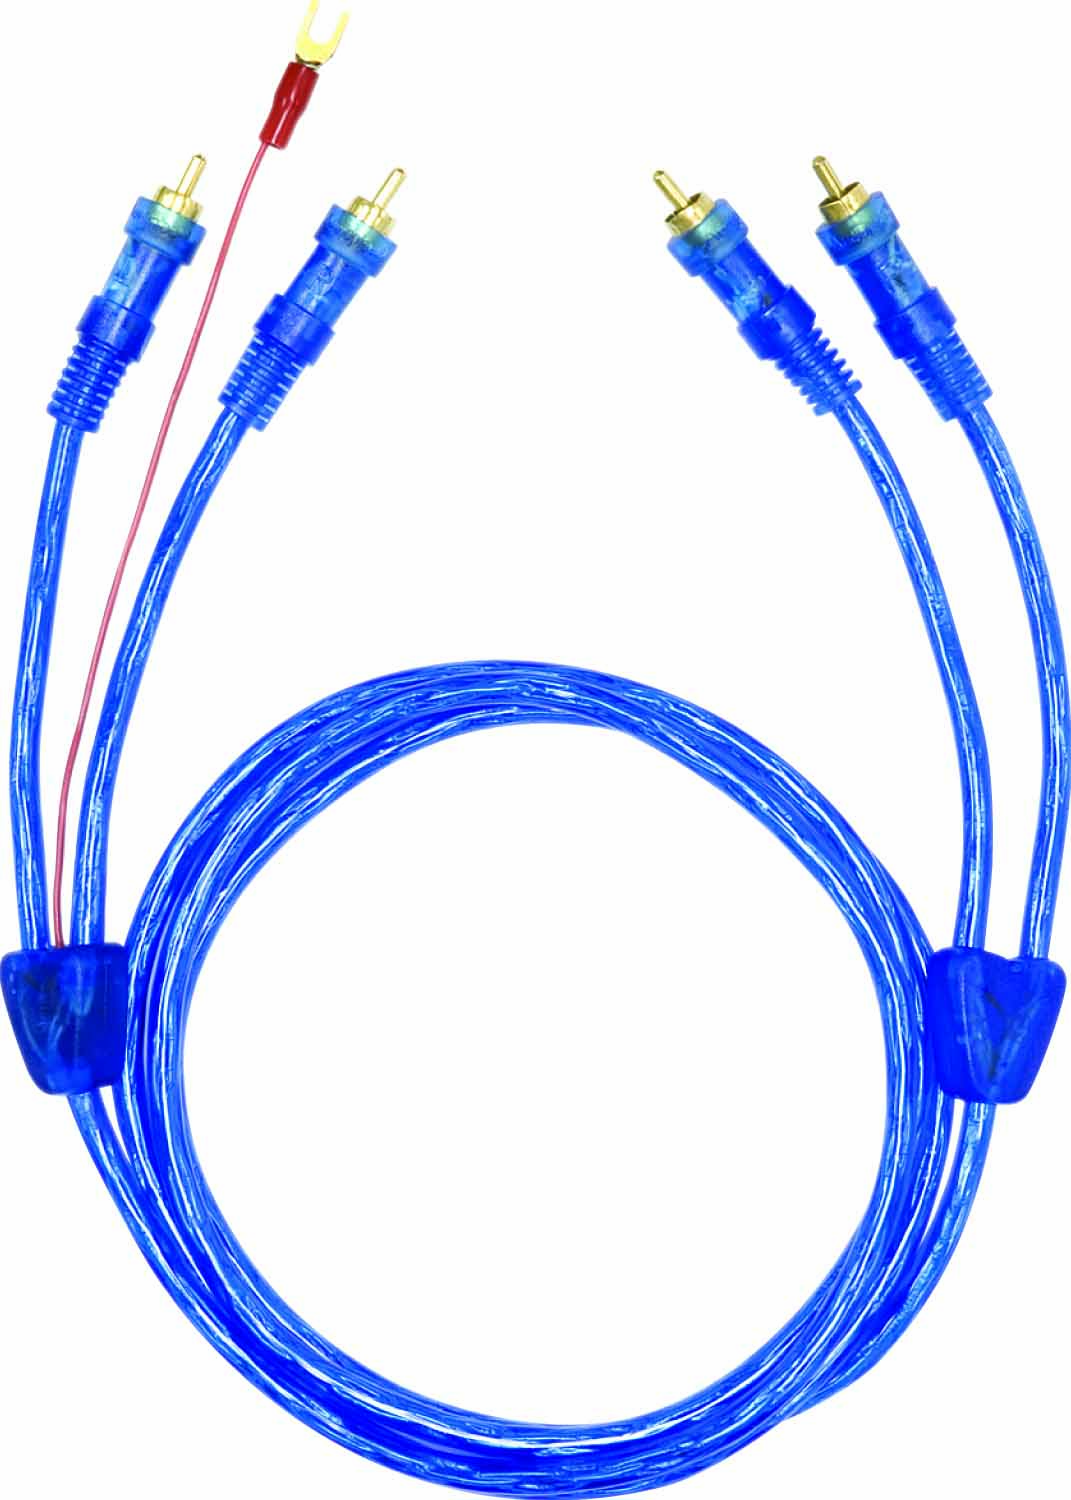 AudioPipe HIGH HEAT RESISTANT PCA CABLE W/BLUE LED